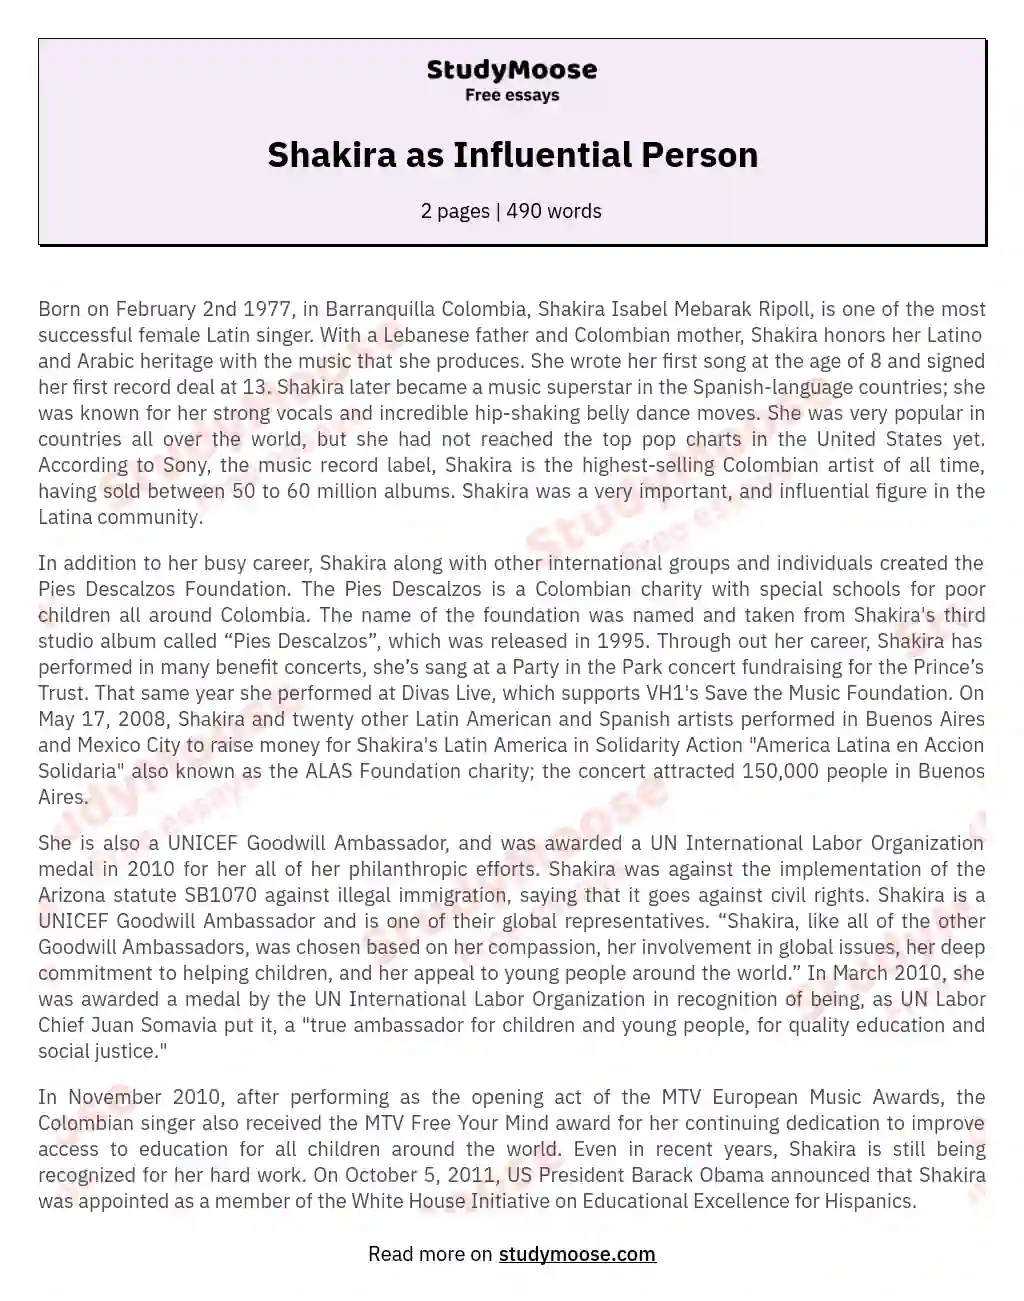 Shakira as Influential Person